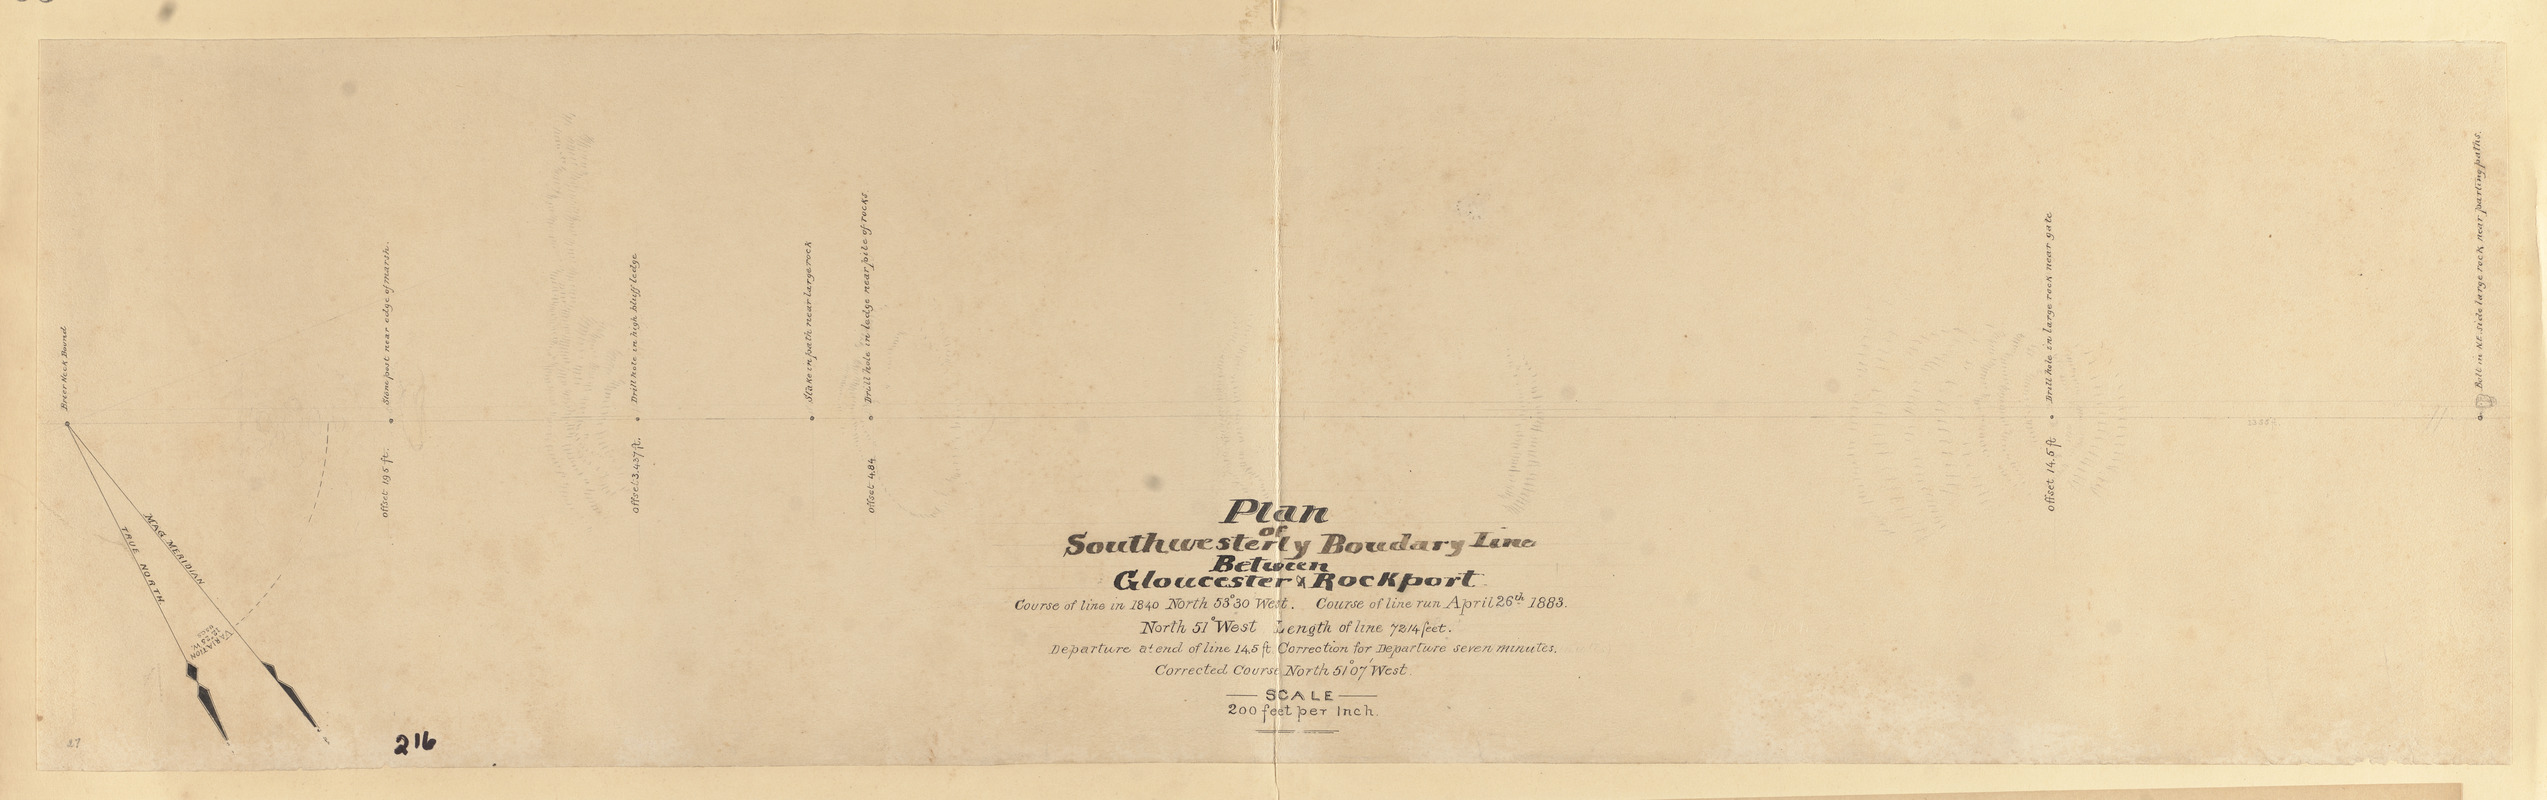 Plan of southwesterly boudary line between Gloucester & Rockport